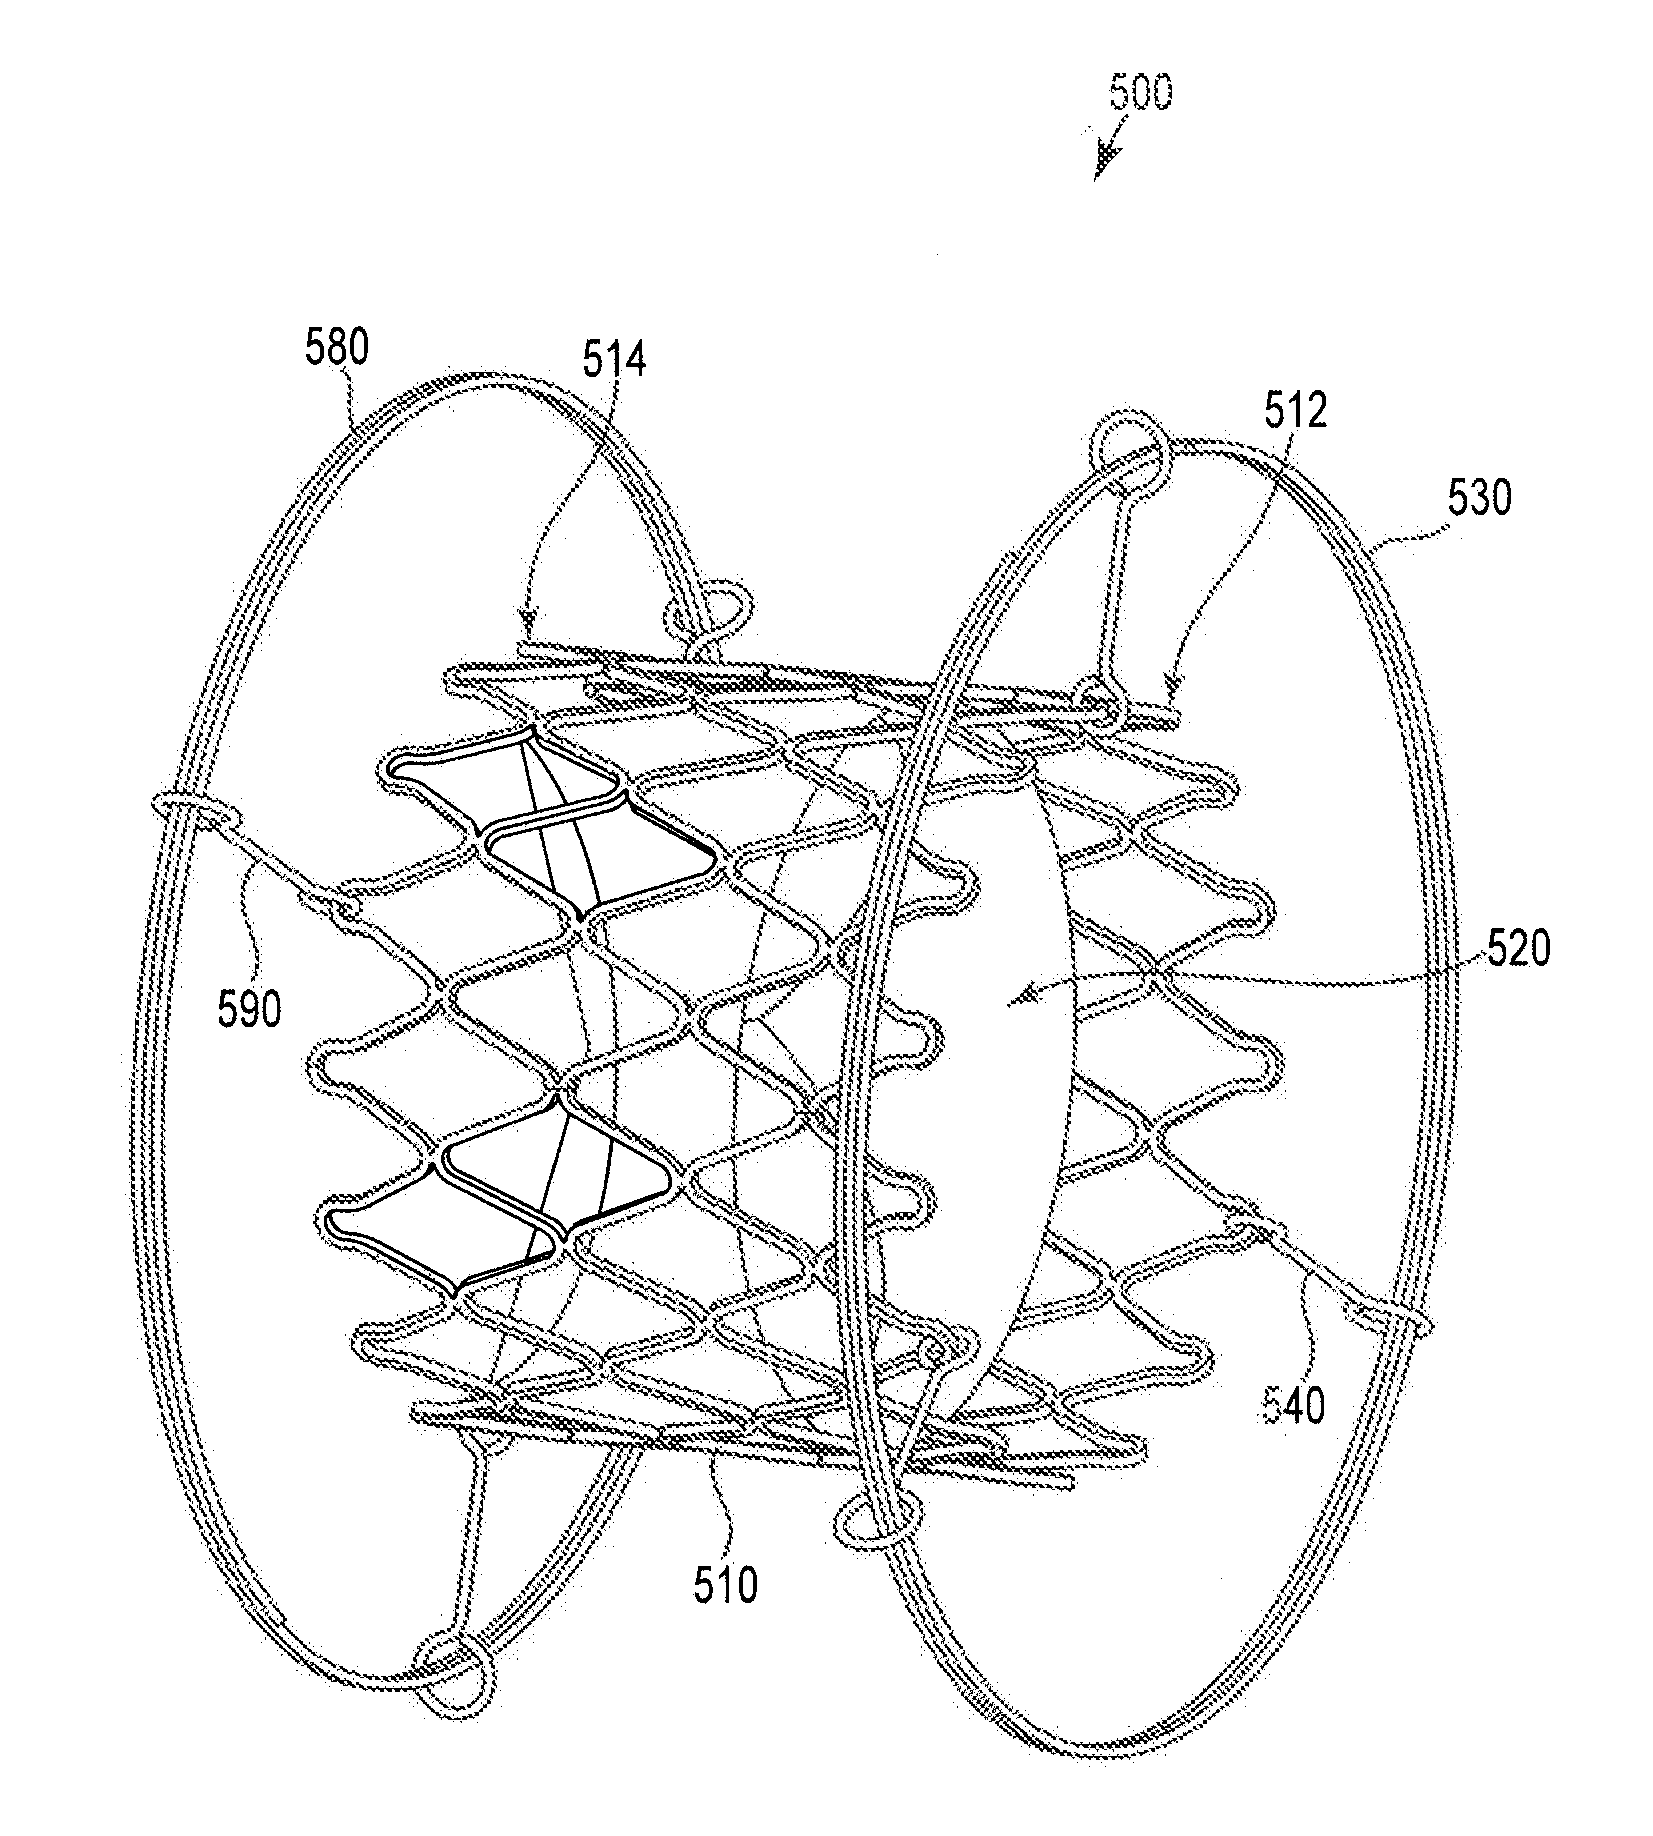 Transcatheter Valve with Torsion Spring Fixation and Related Systems and Methods